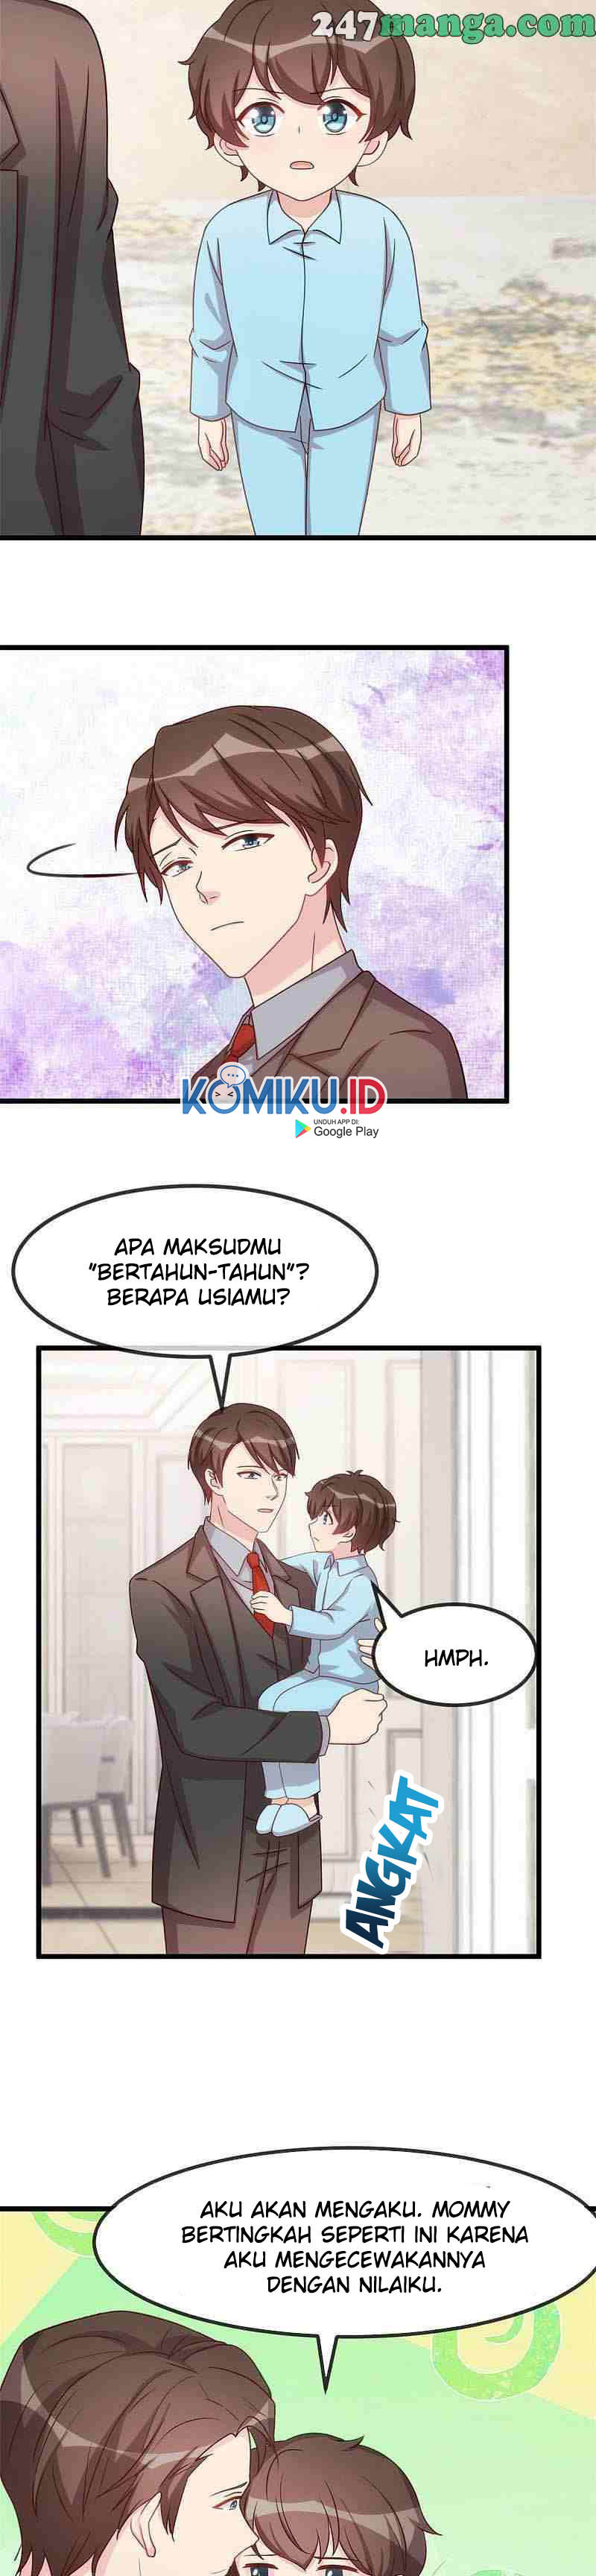 CEO’s Sudden Proposal Chapter 337 8